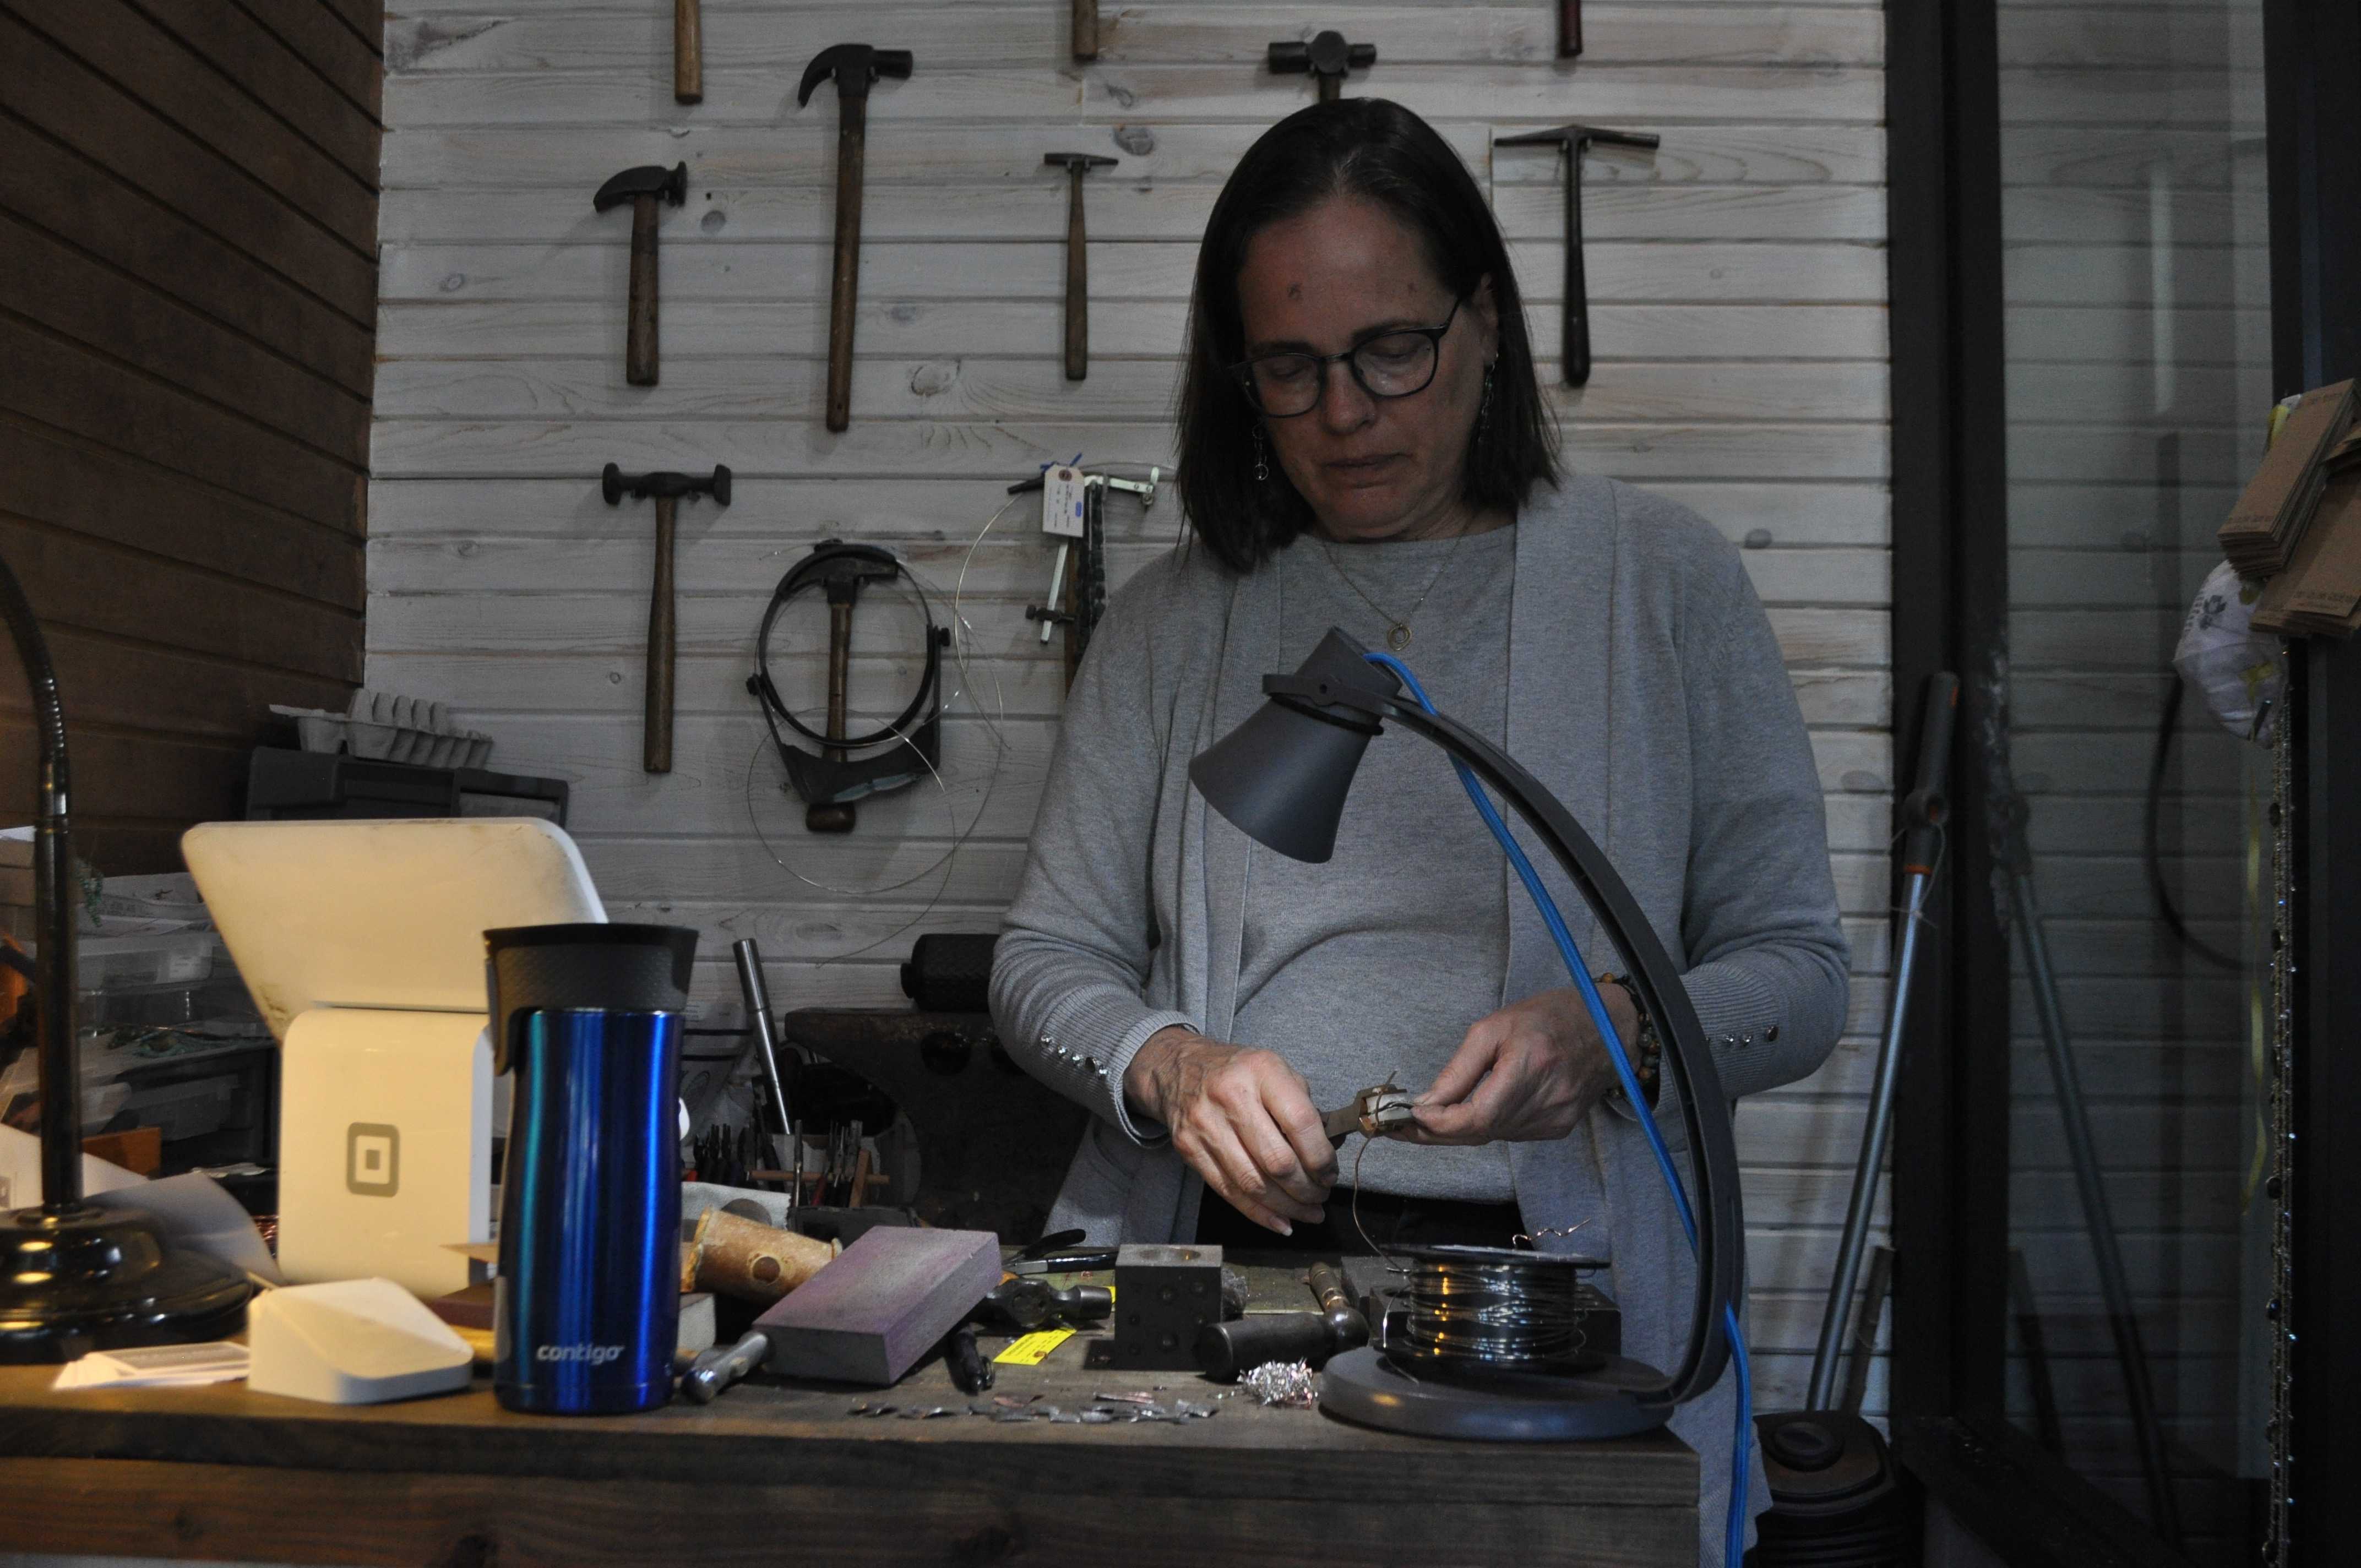 Woman making jewelry at worktable